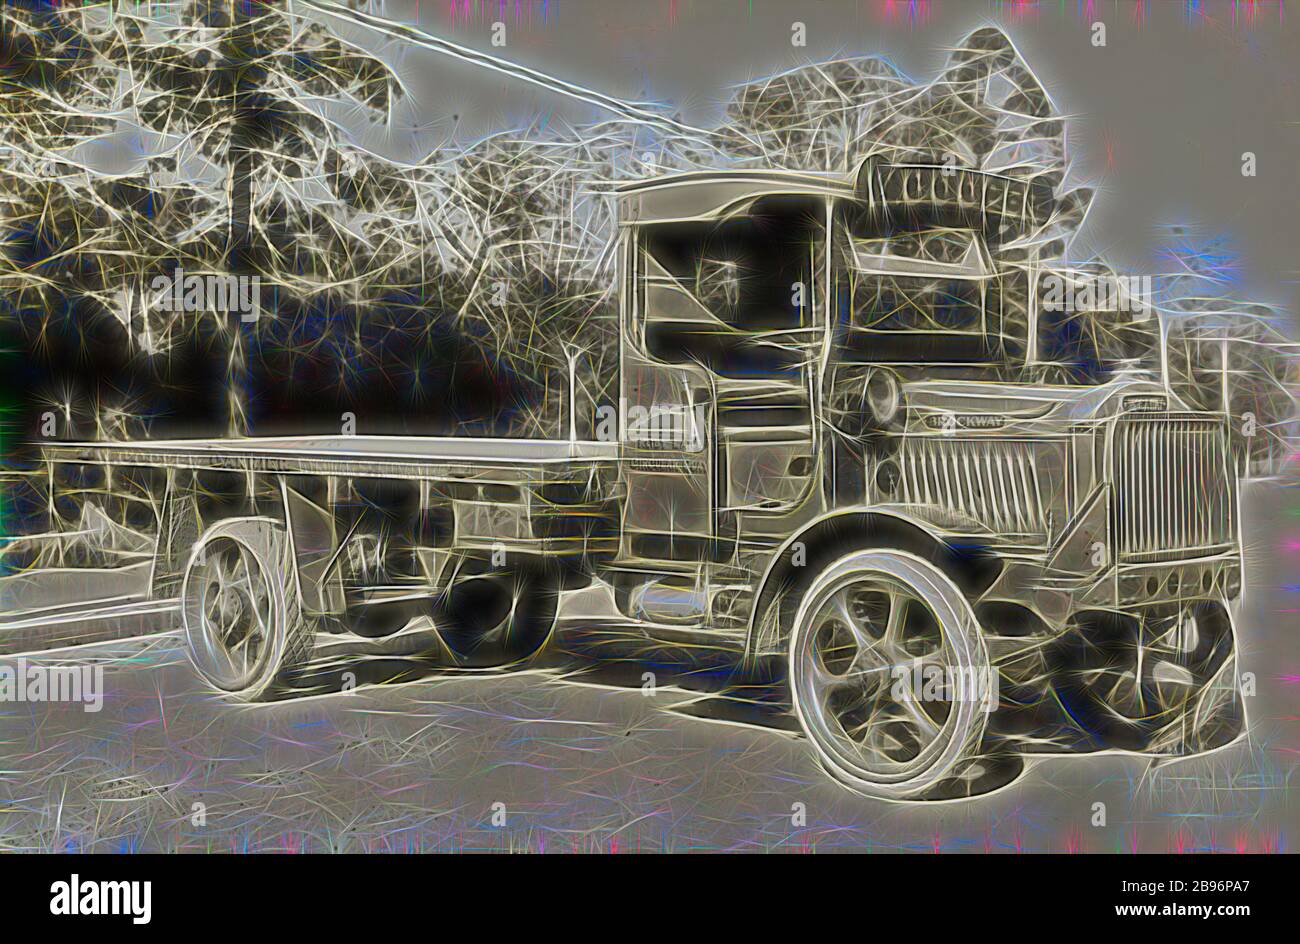 Photograph - Brockway Motors Ltd, Five Ton Truck, Sydney, New South Wales, circa 1927, Image from a photograph album containing twenty one photographs of motor trucks. The album was used by Brockway Motors Ltd., Reimagined by Gibon, design of warm cheerful glowing of brightness and light rays radiance. Classic art reinvented with a modern twist. Photography inspired by futurism, embracing dynamic energy of modern technology, movement, speed and revolutionize culture. Stock Photo